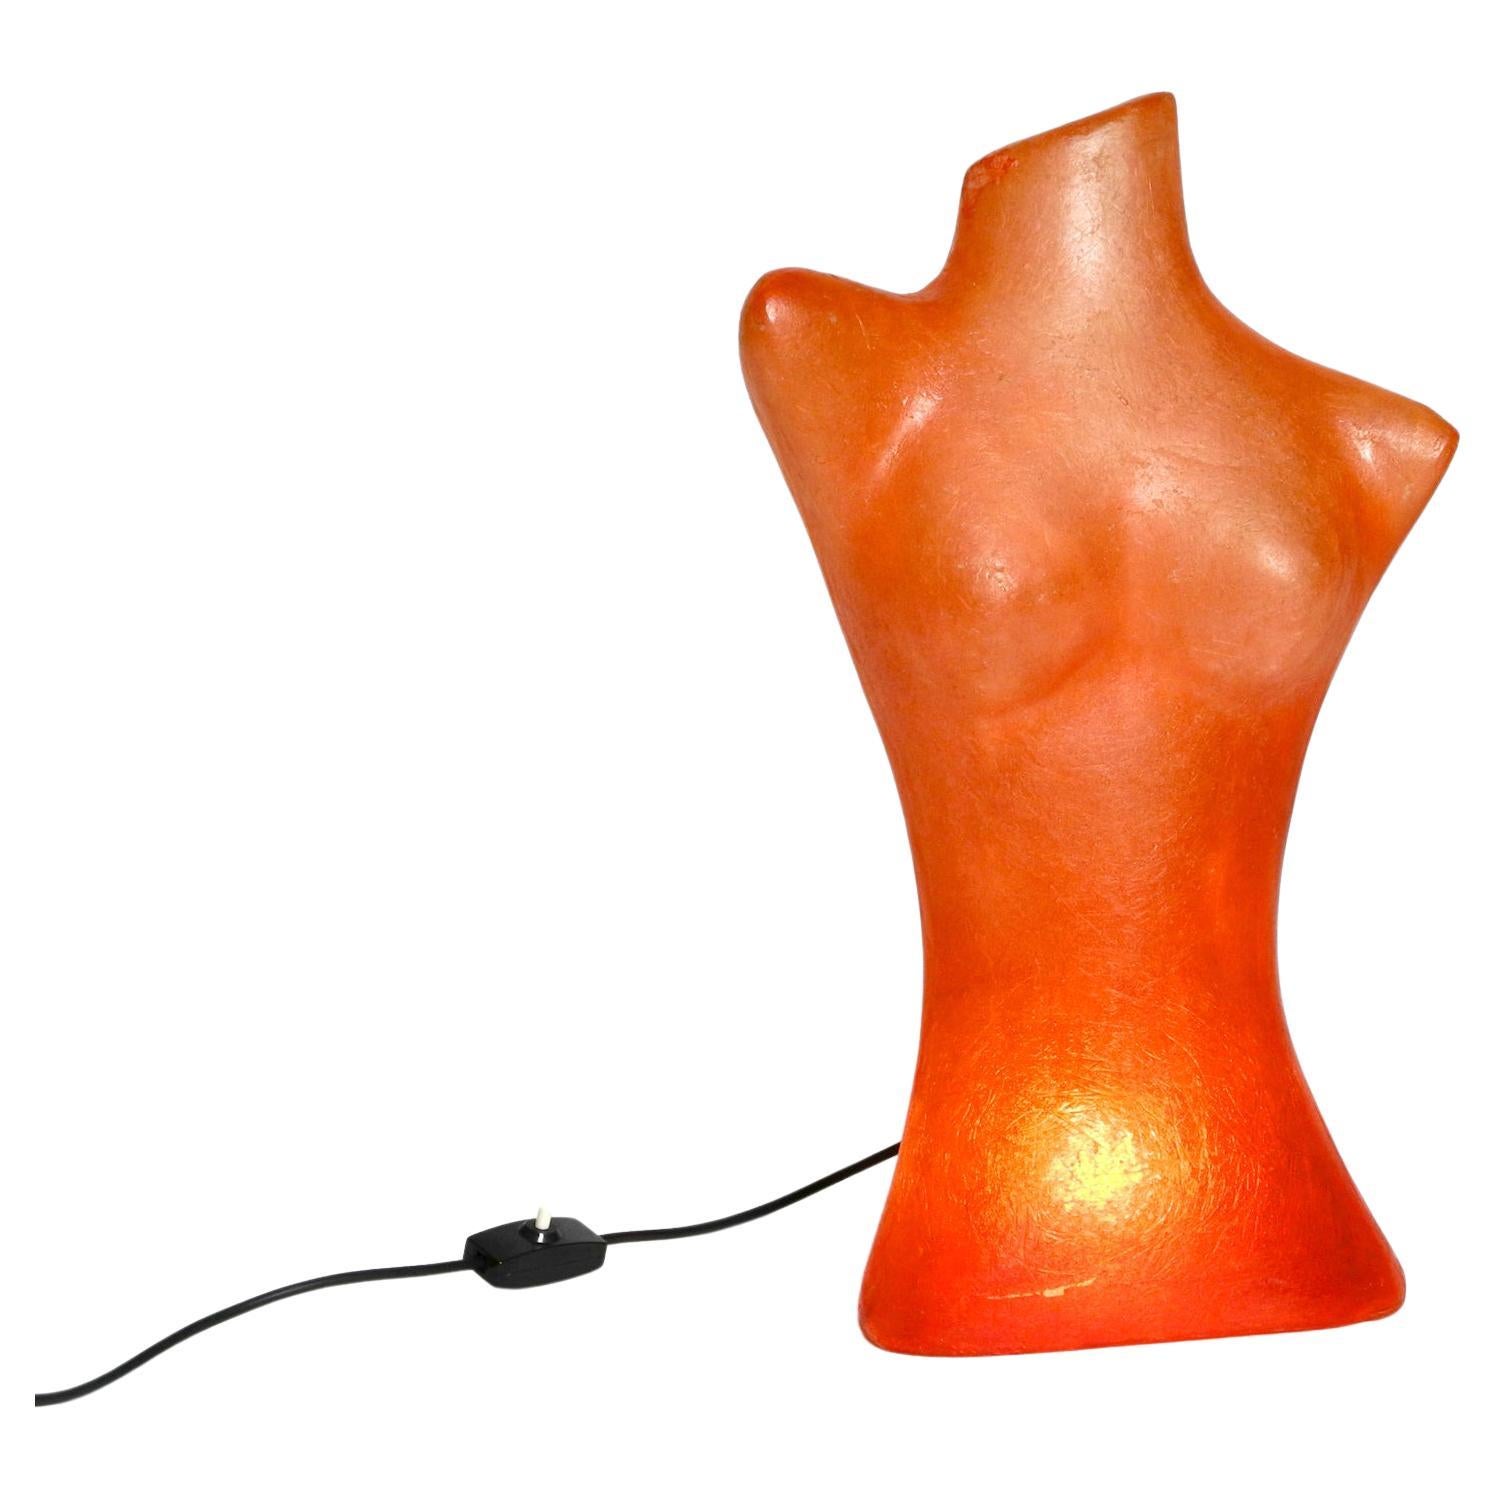 Exceptional 1960s Woman Torso Table Lamp Made of Fiberglass in Red